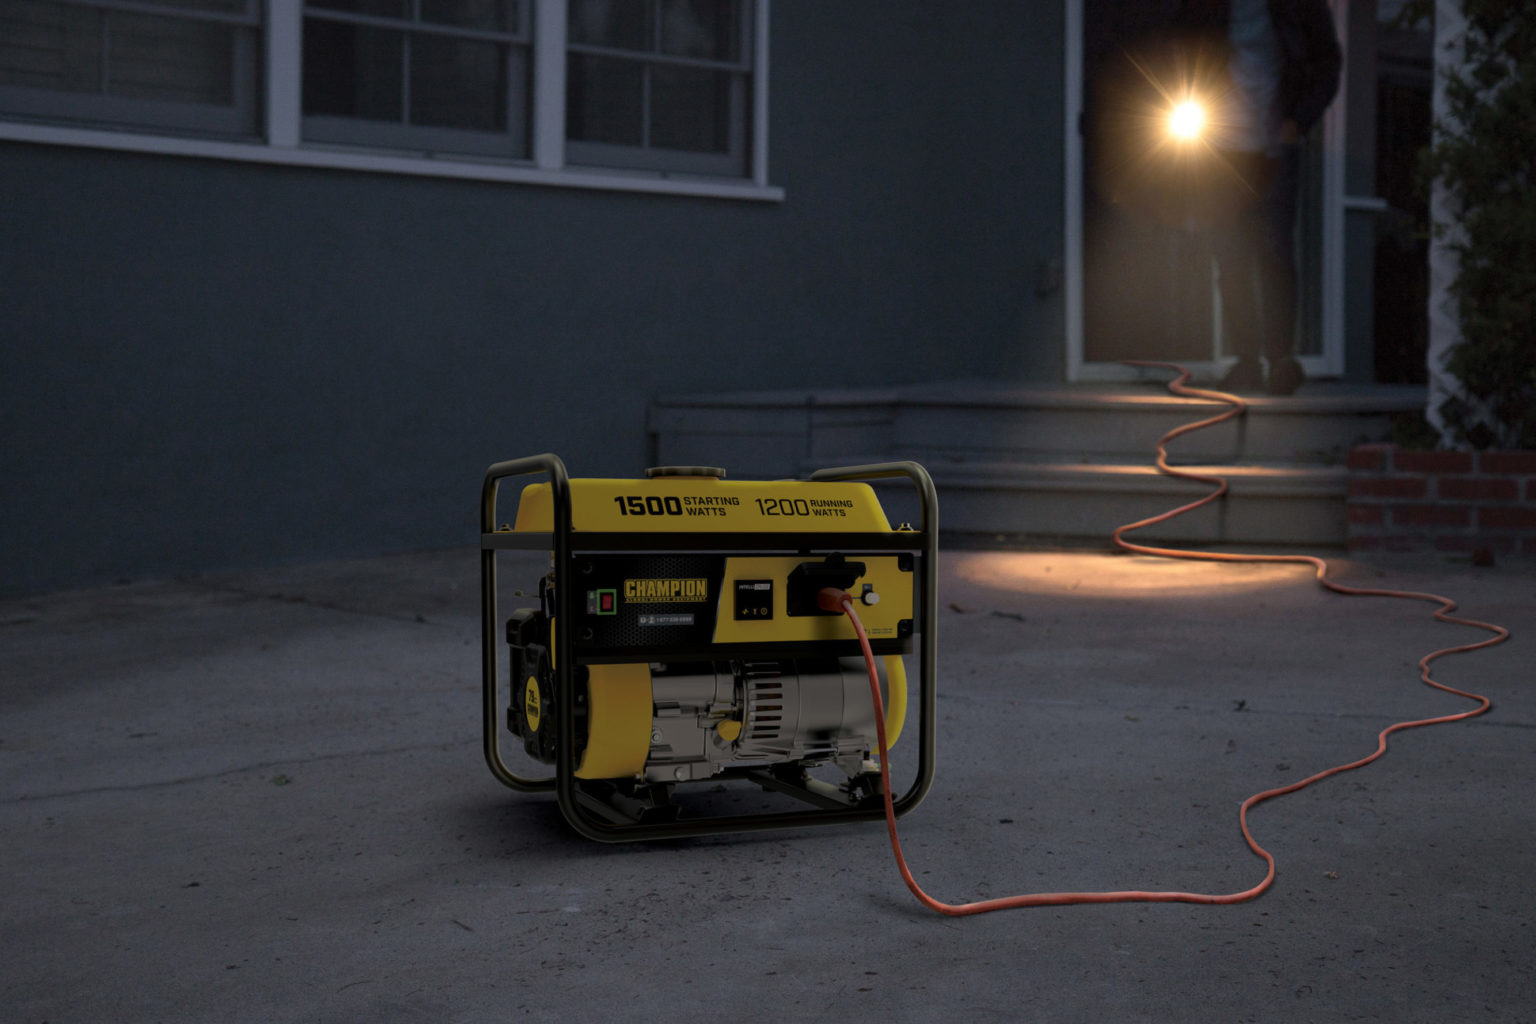 Backup generator in use during a power outage